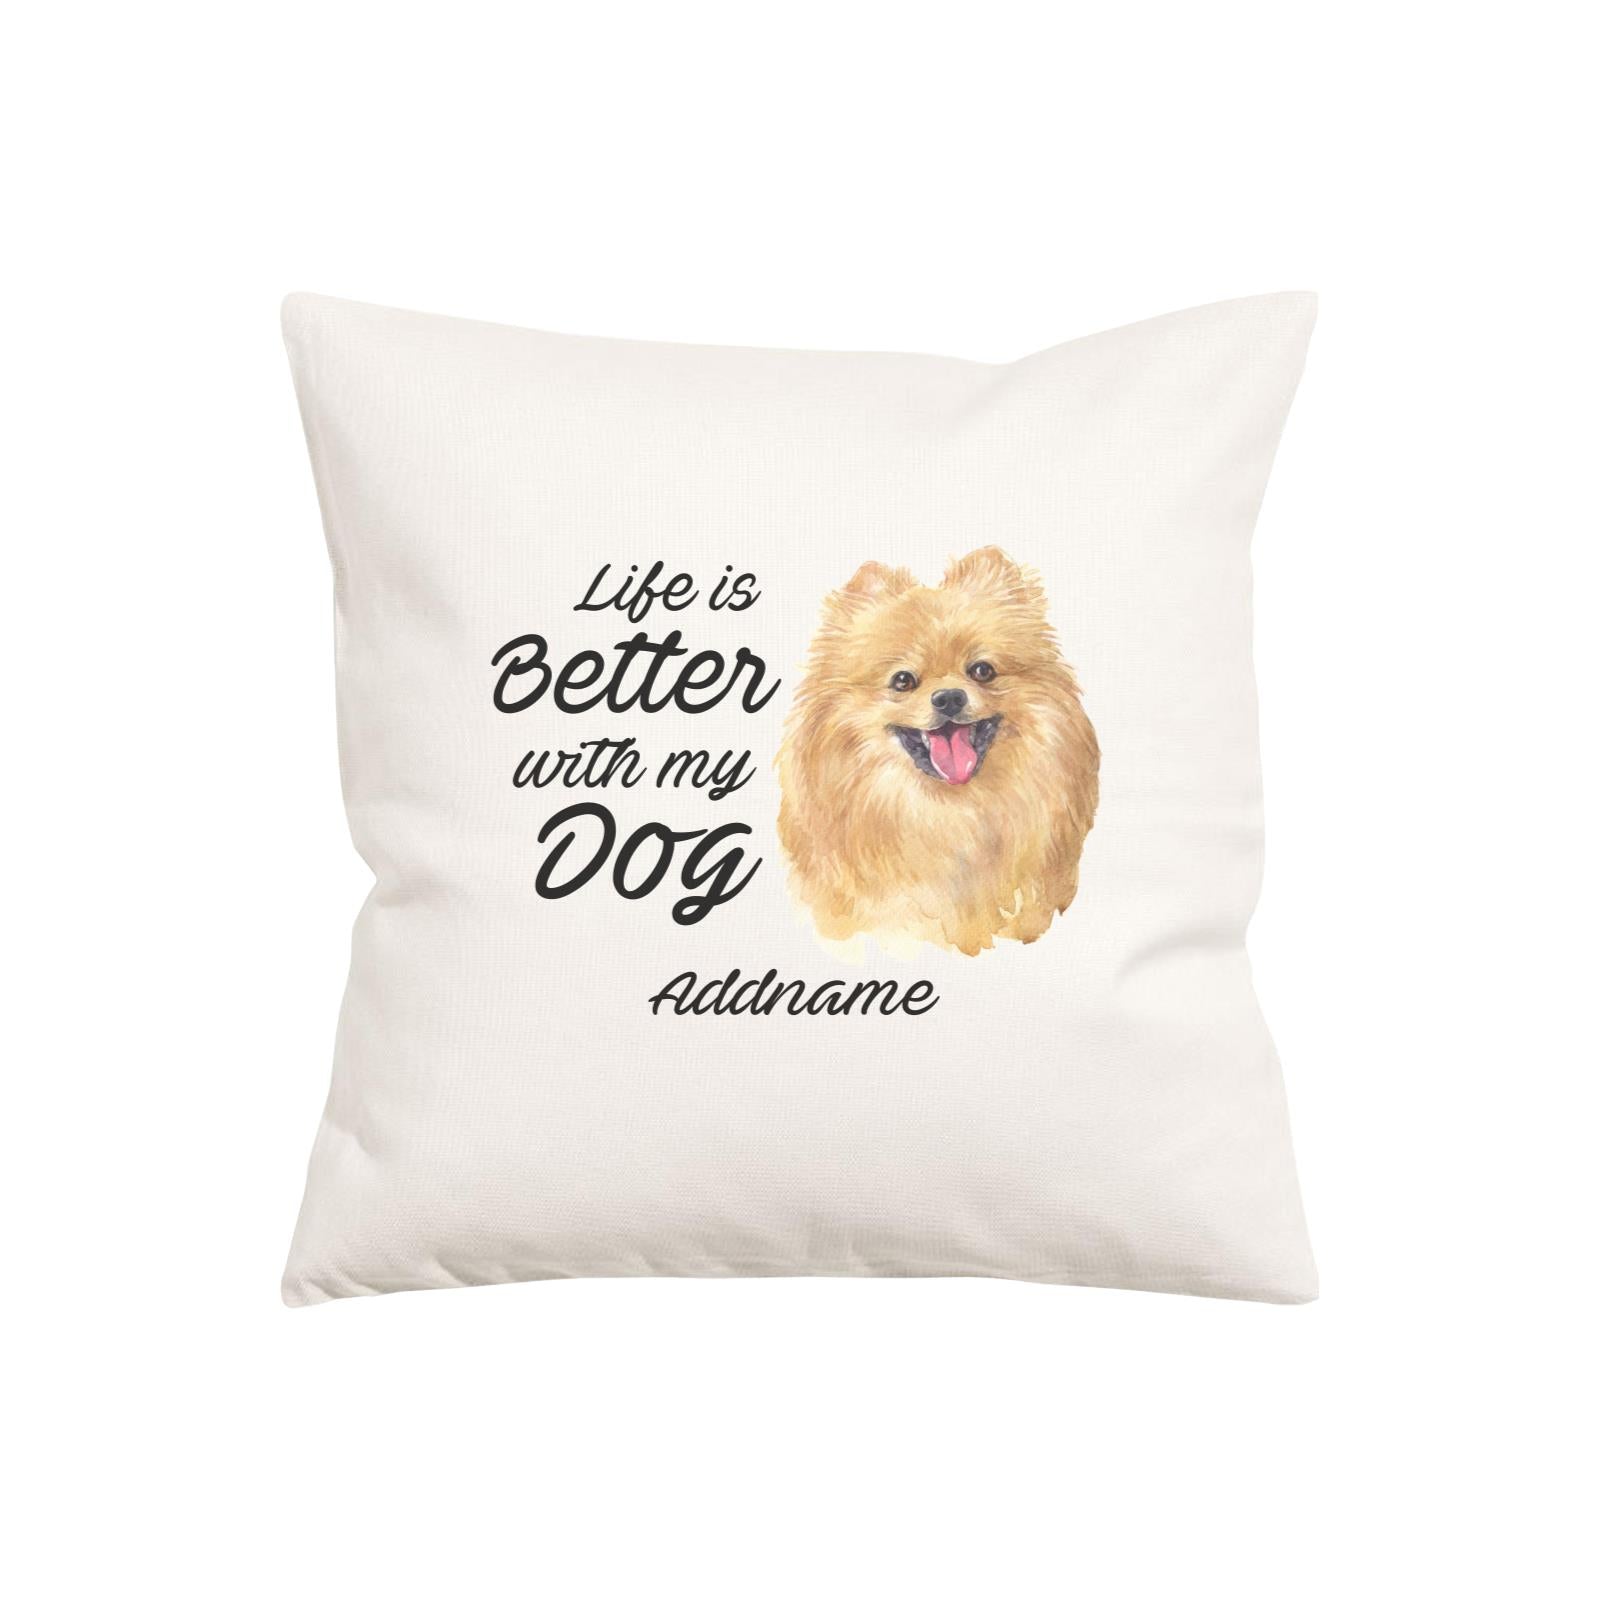 Watercolor Life is Better With My Dog Pomeranian Addname Pillow Cushion